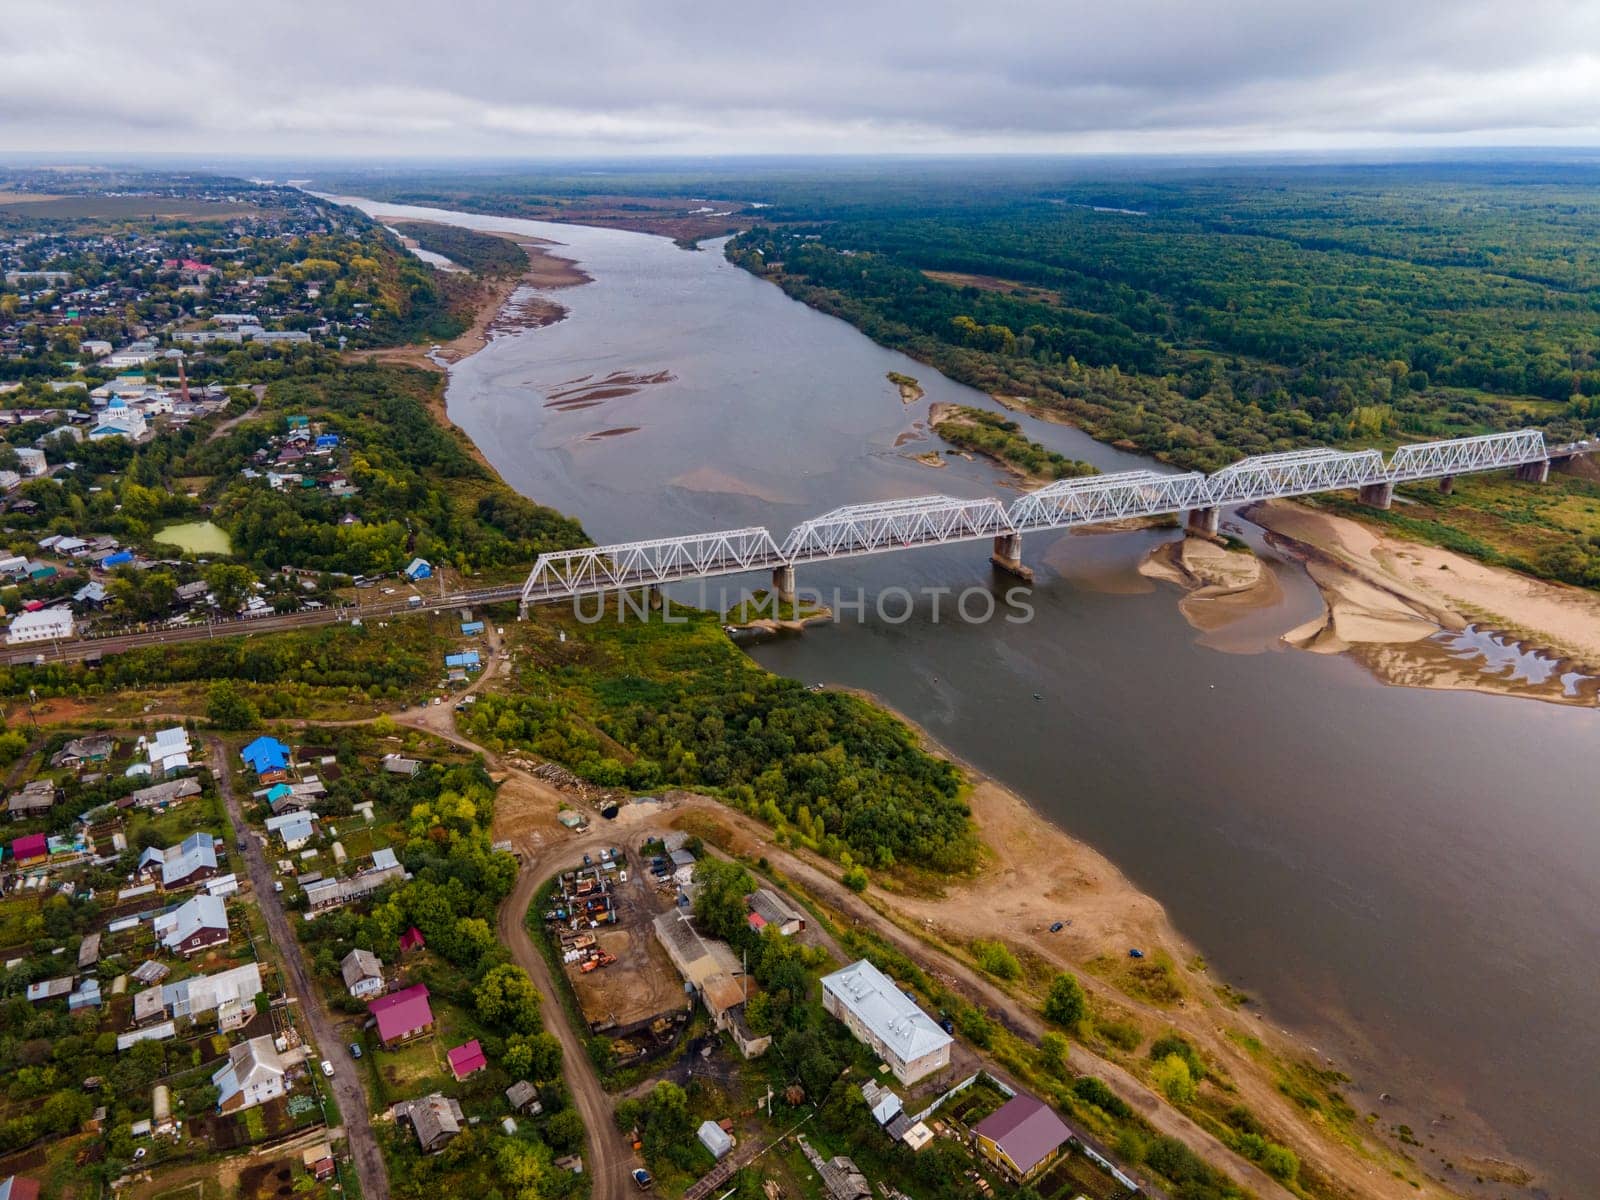 Drone view of bridge above river between lush trees and dwelling buildings in region of Kirov Russia